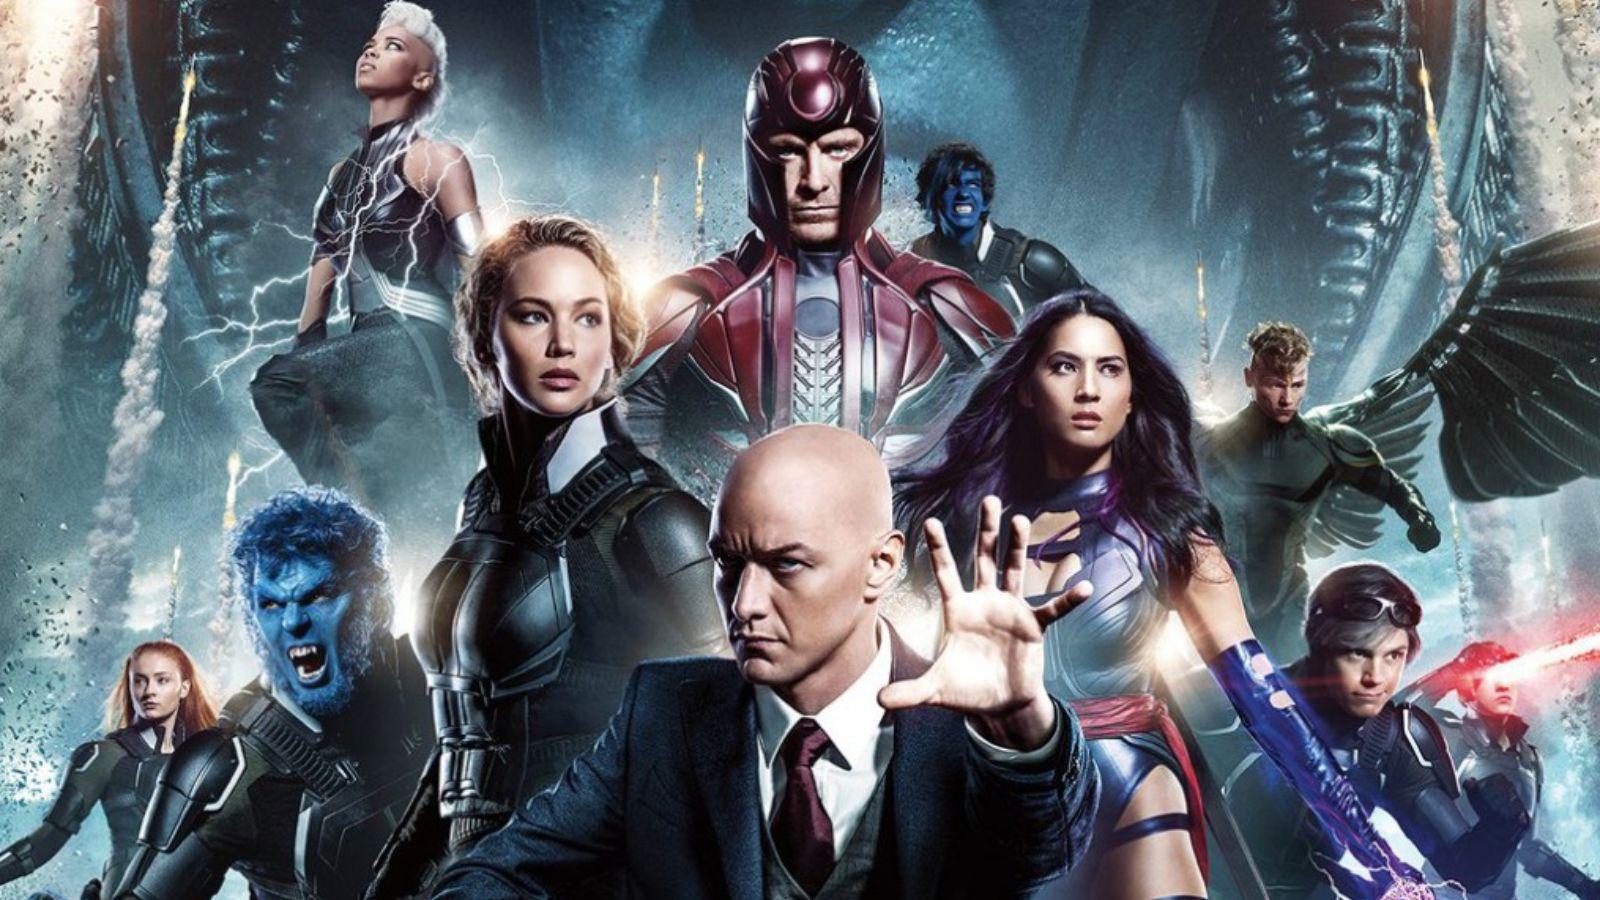 The X-Men: Apocalypse cast in the official poster.